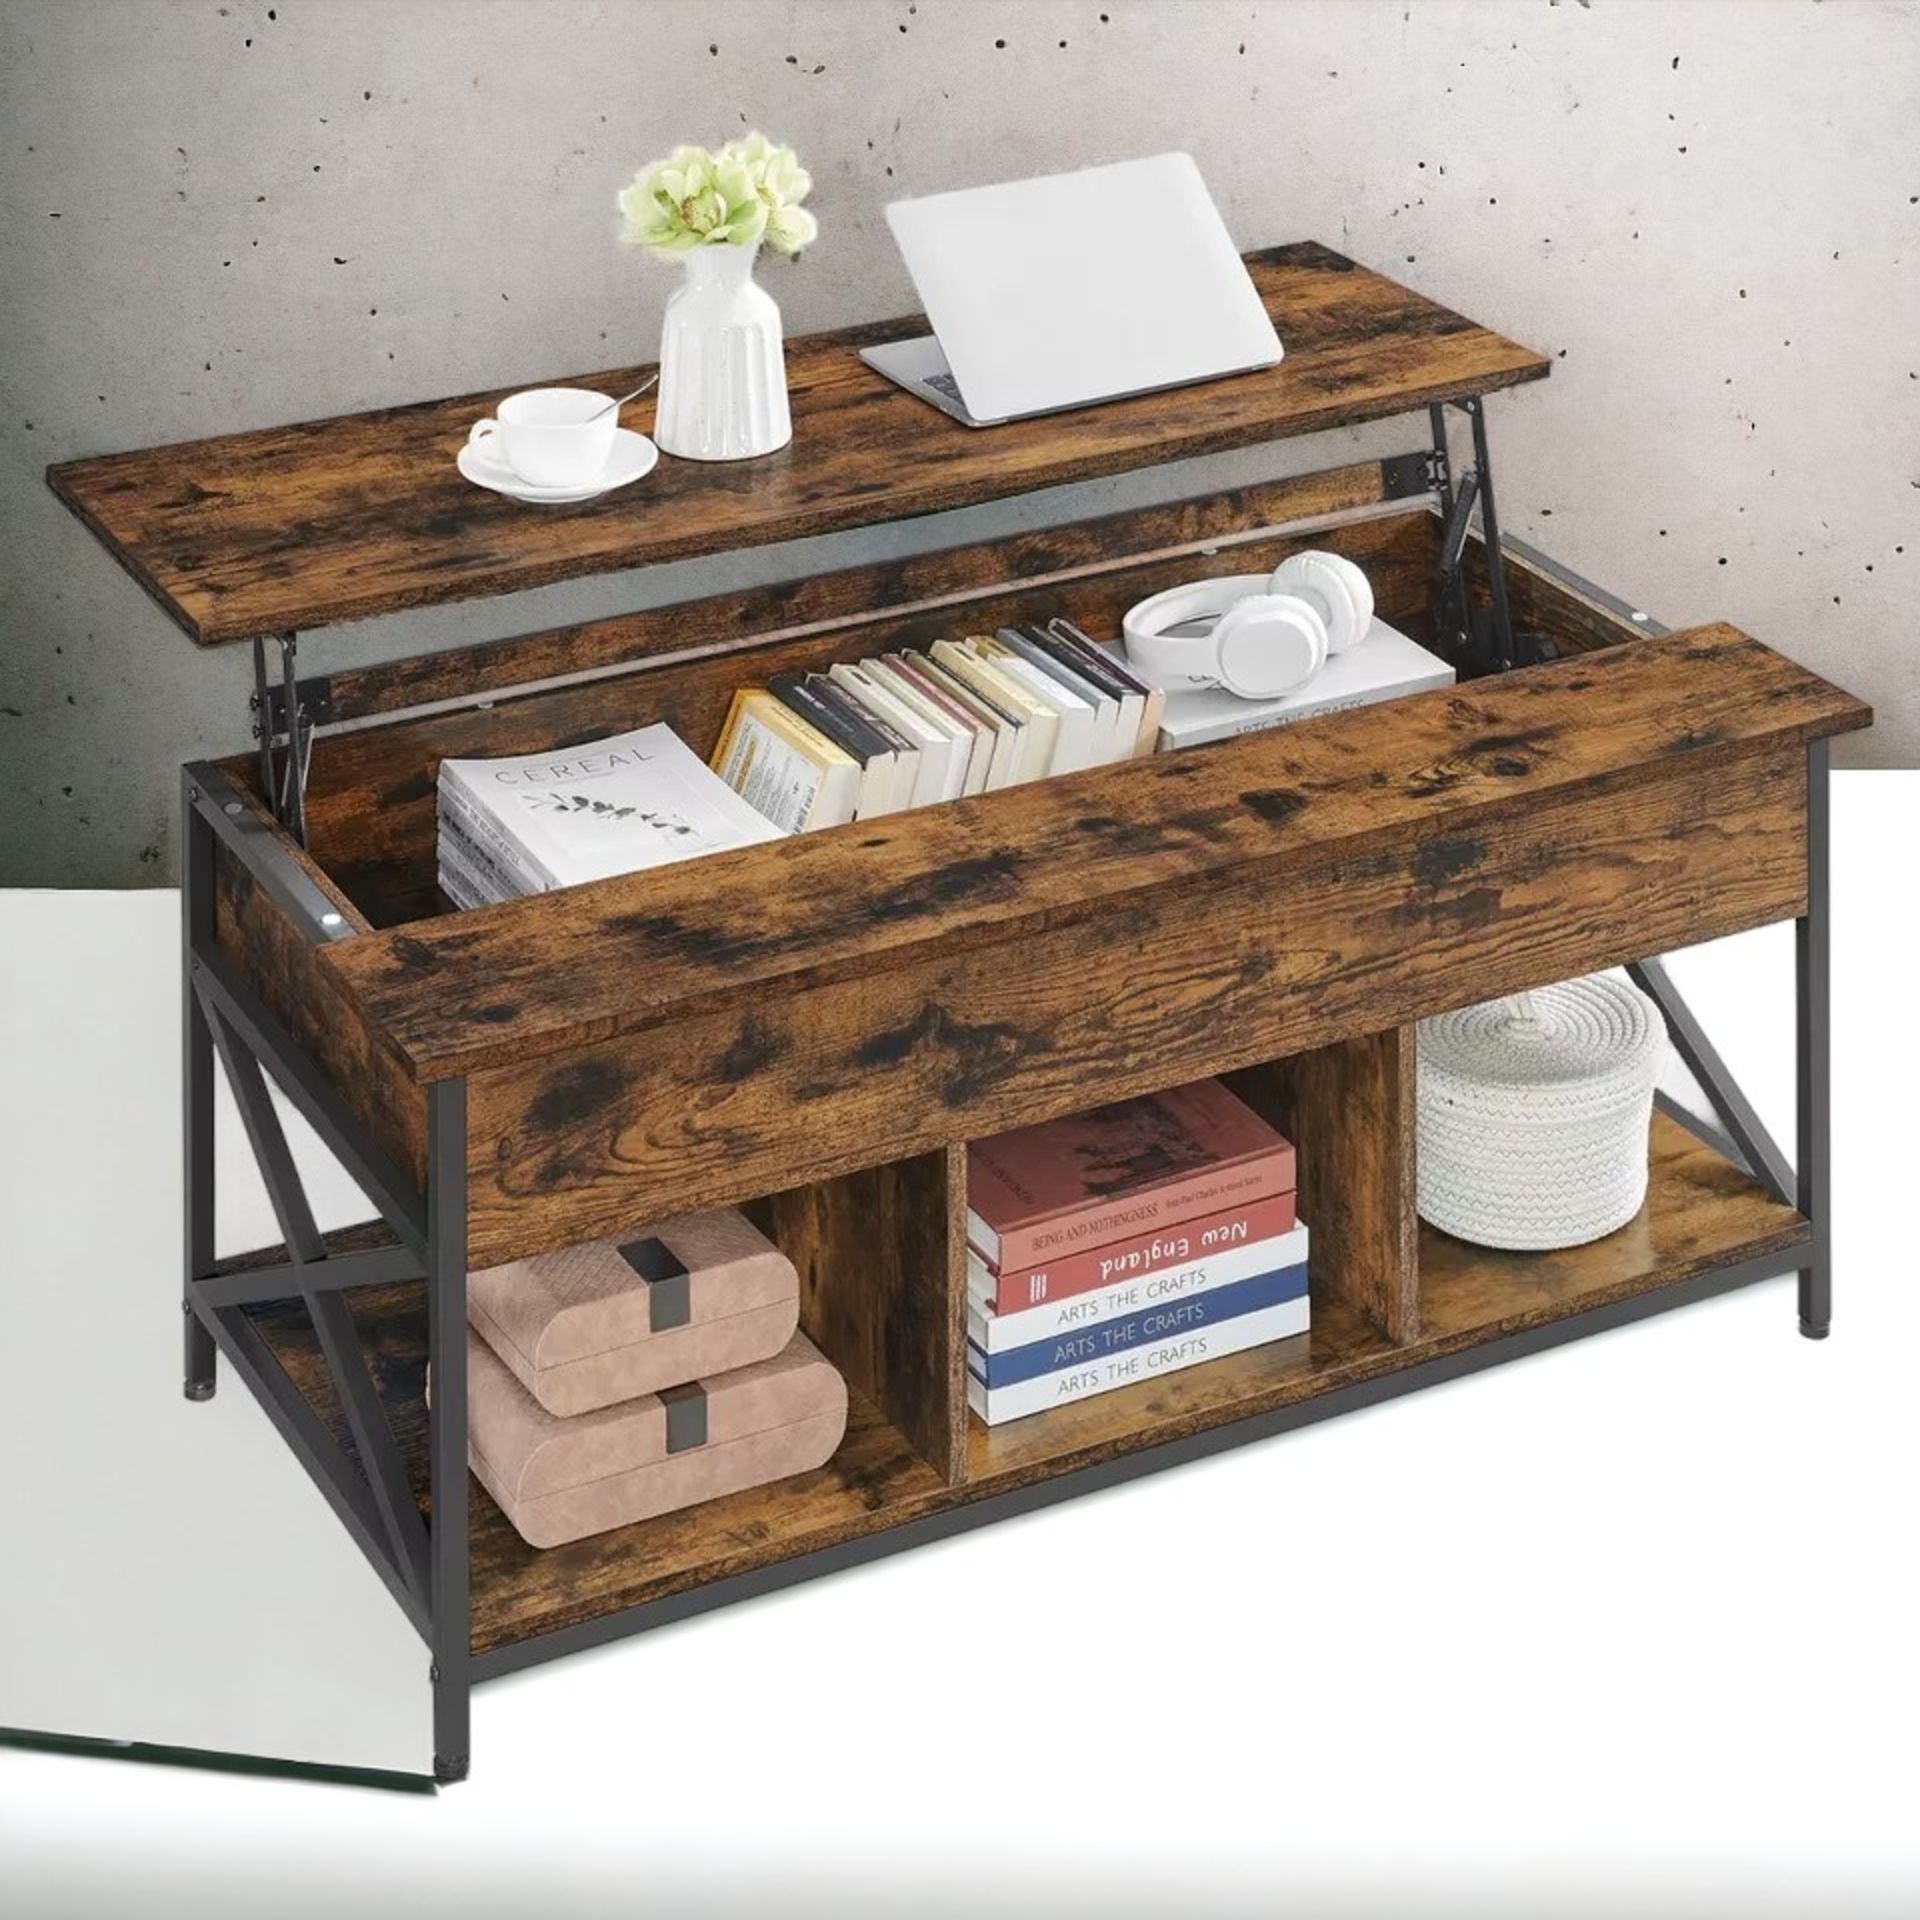 FREE DELIVERY - BRAND NEW COFFEE TABLE LIFTTOP TABLE OPEN HIDDEN STORAGE RUSTIC BROWN AND BLACK